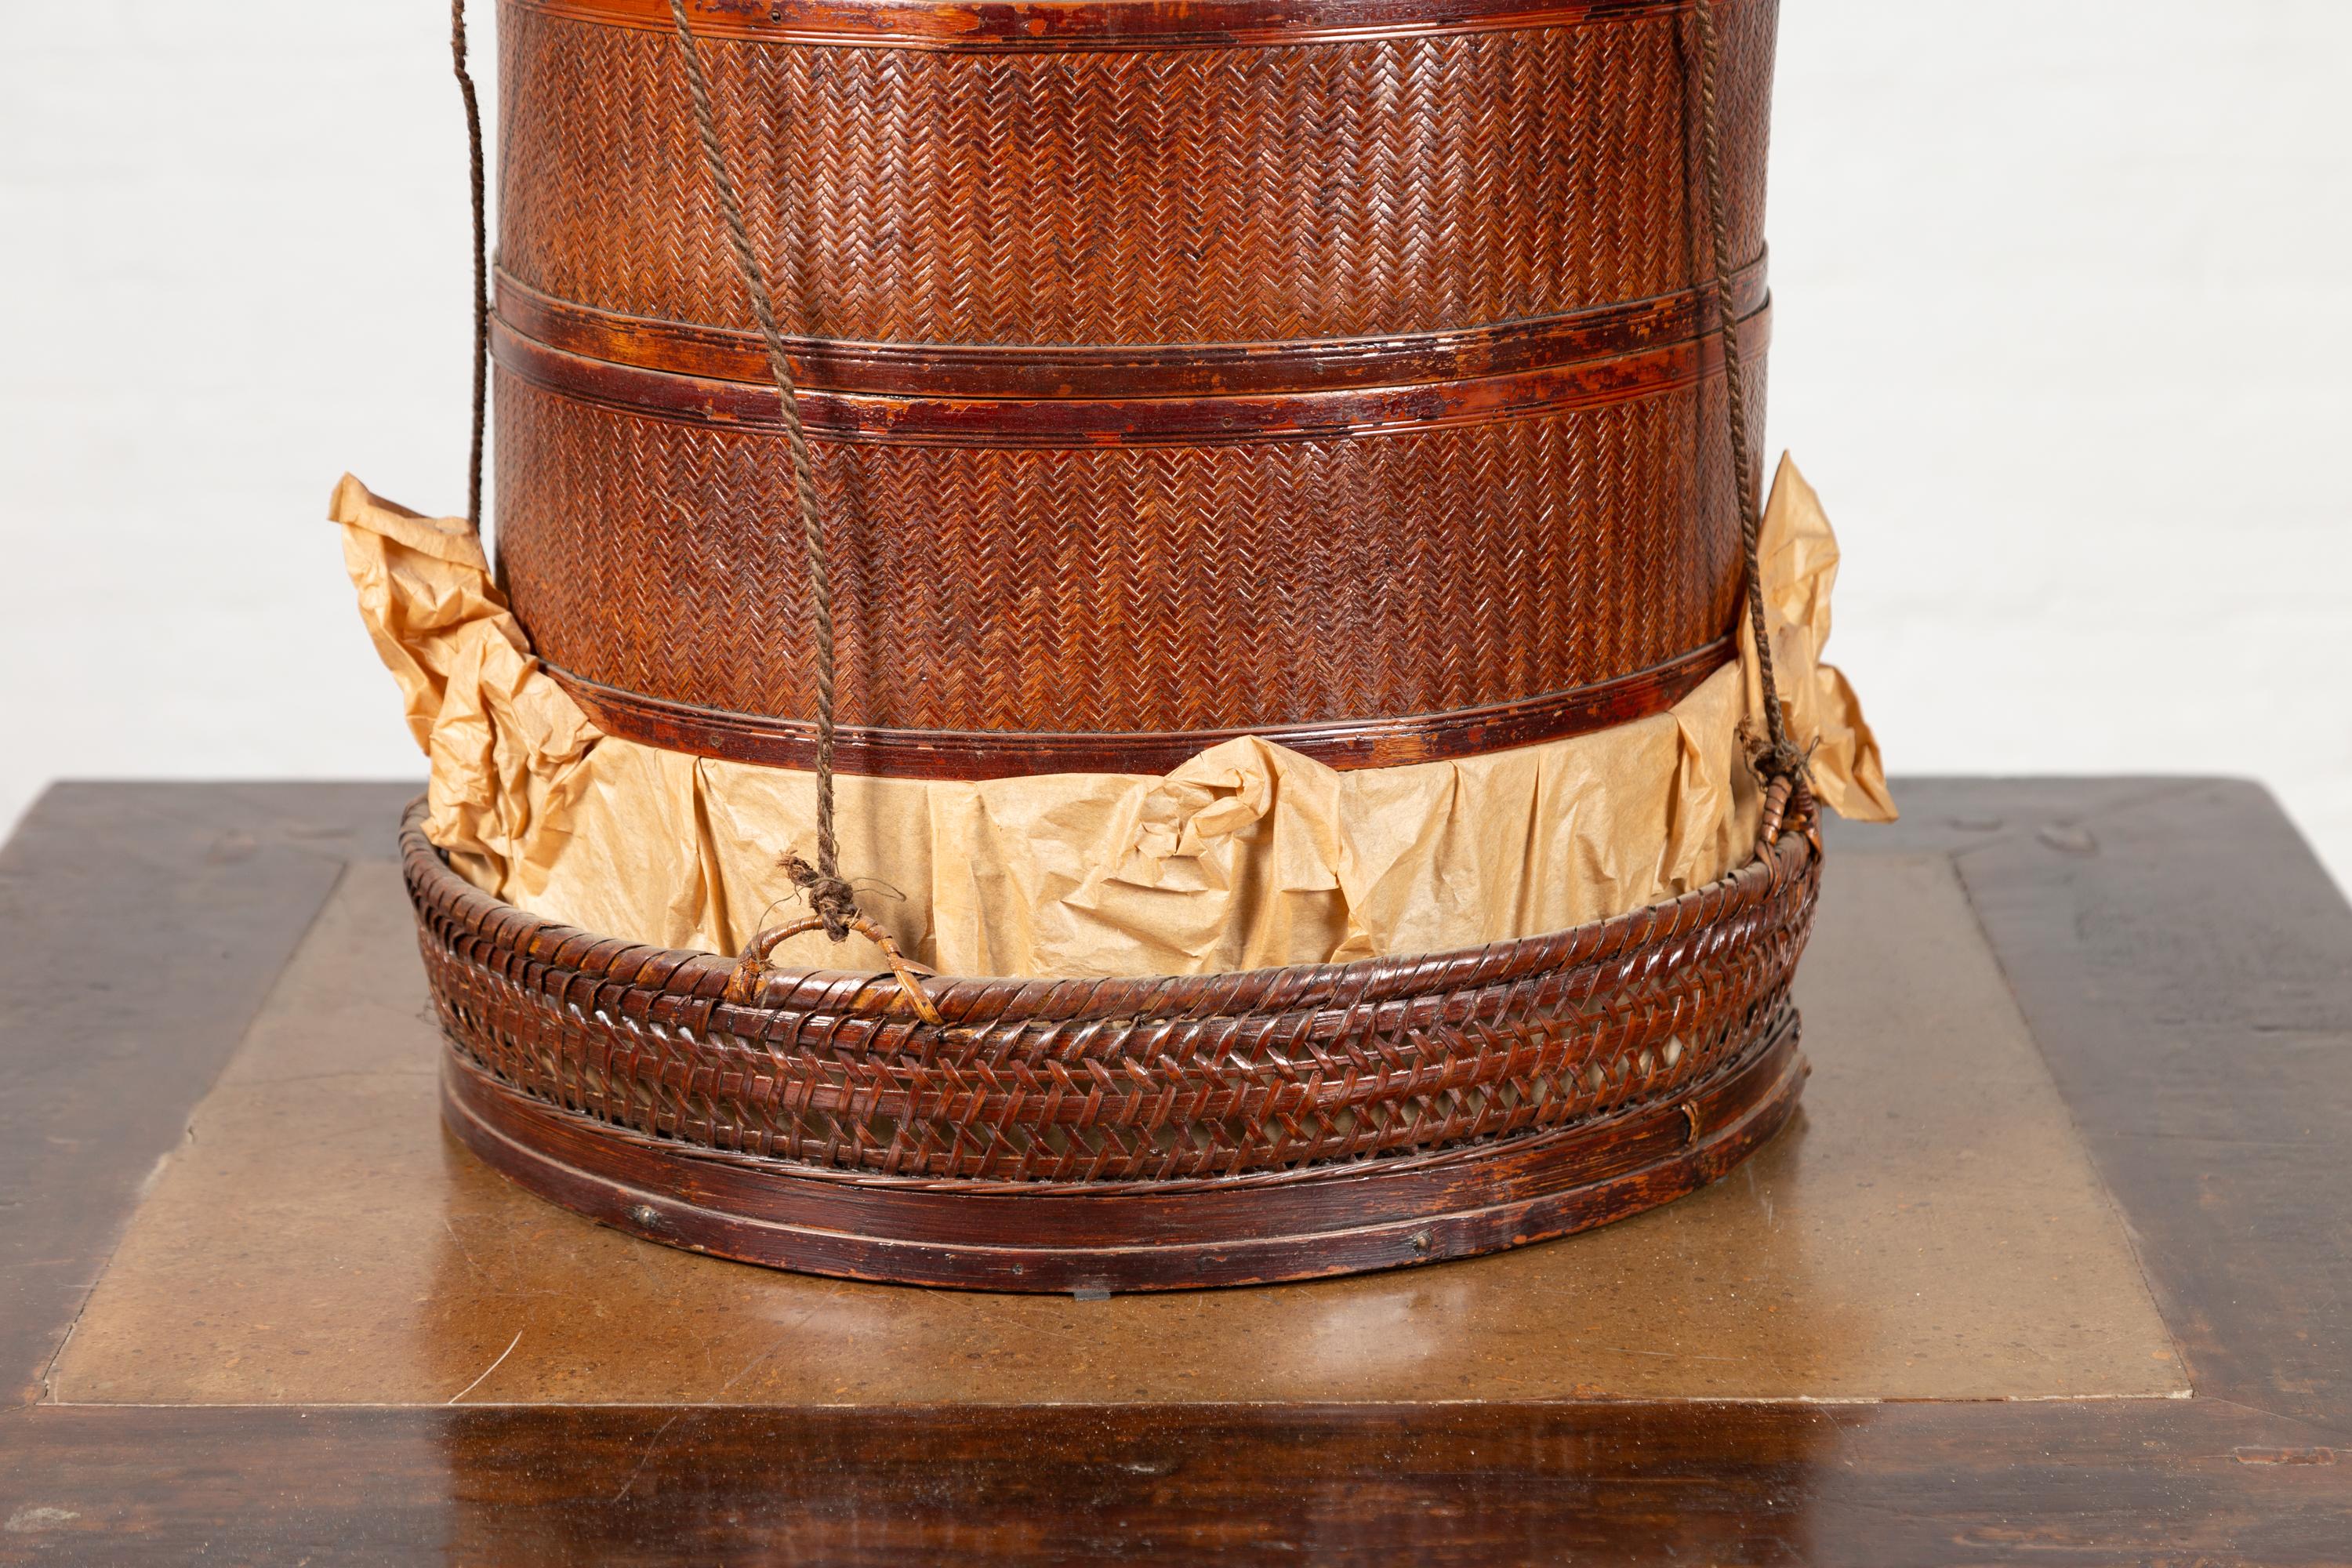 Chinese 19th Century Tiered Food Basket with Stacking Parts, Paper and Rope Ties In Good Condition For Sale In Yonkers, NY